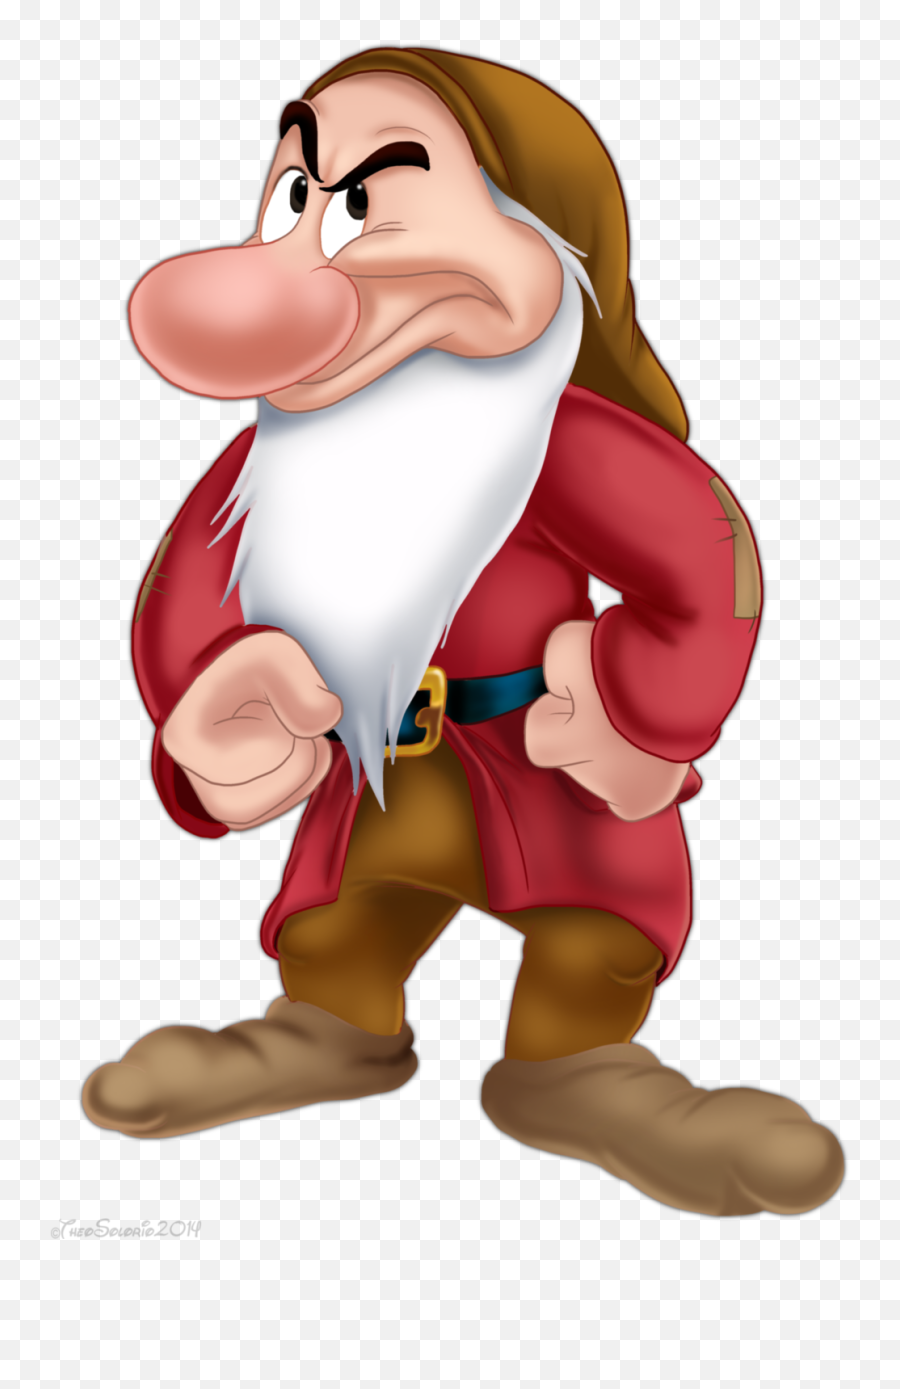 Grumpy From Snow White And The Seven Dwarfs Clipart - Full Grumpy Snow White Dwarfs Emoji,Dwarf Emoji